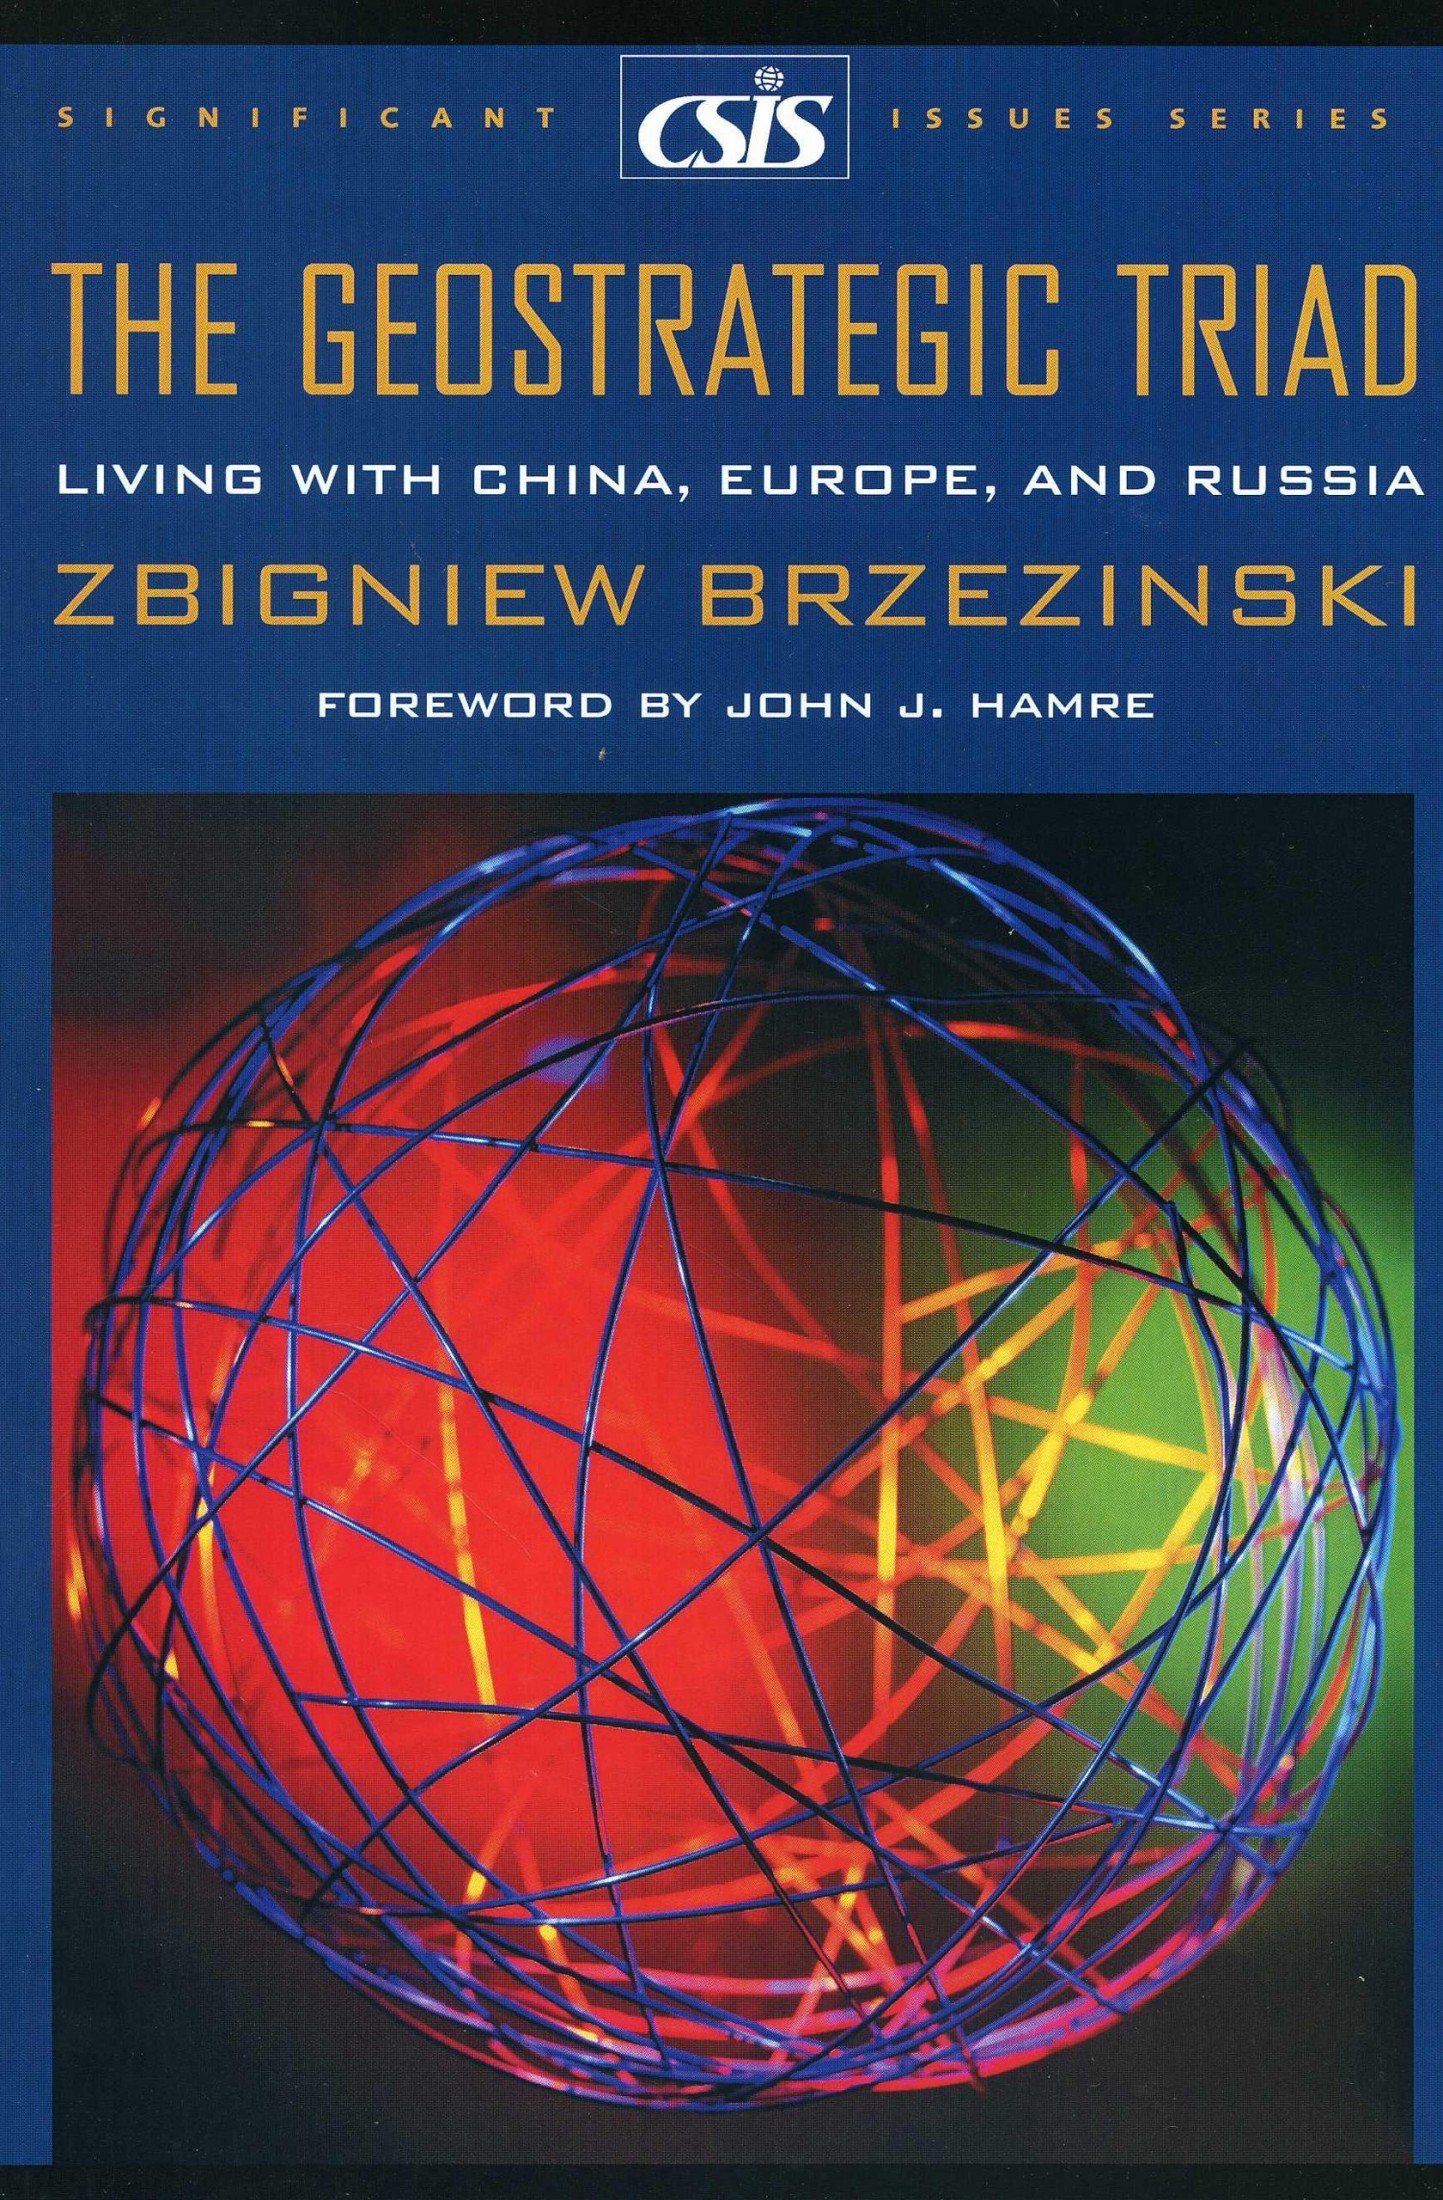 The Geostrategic Triad: Living with China, Europe, and Russia